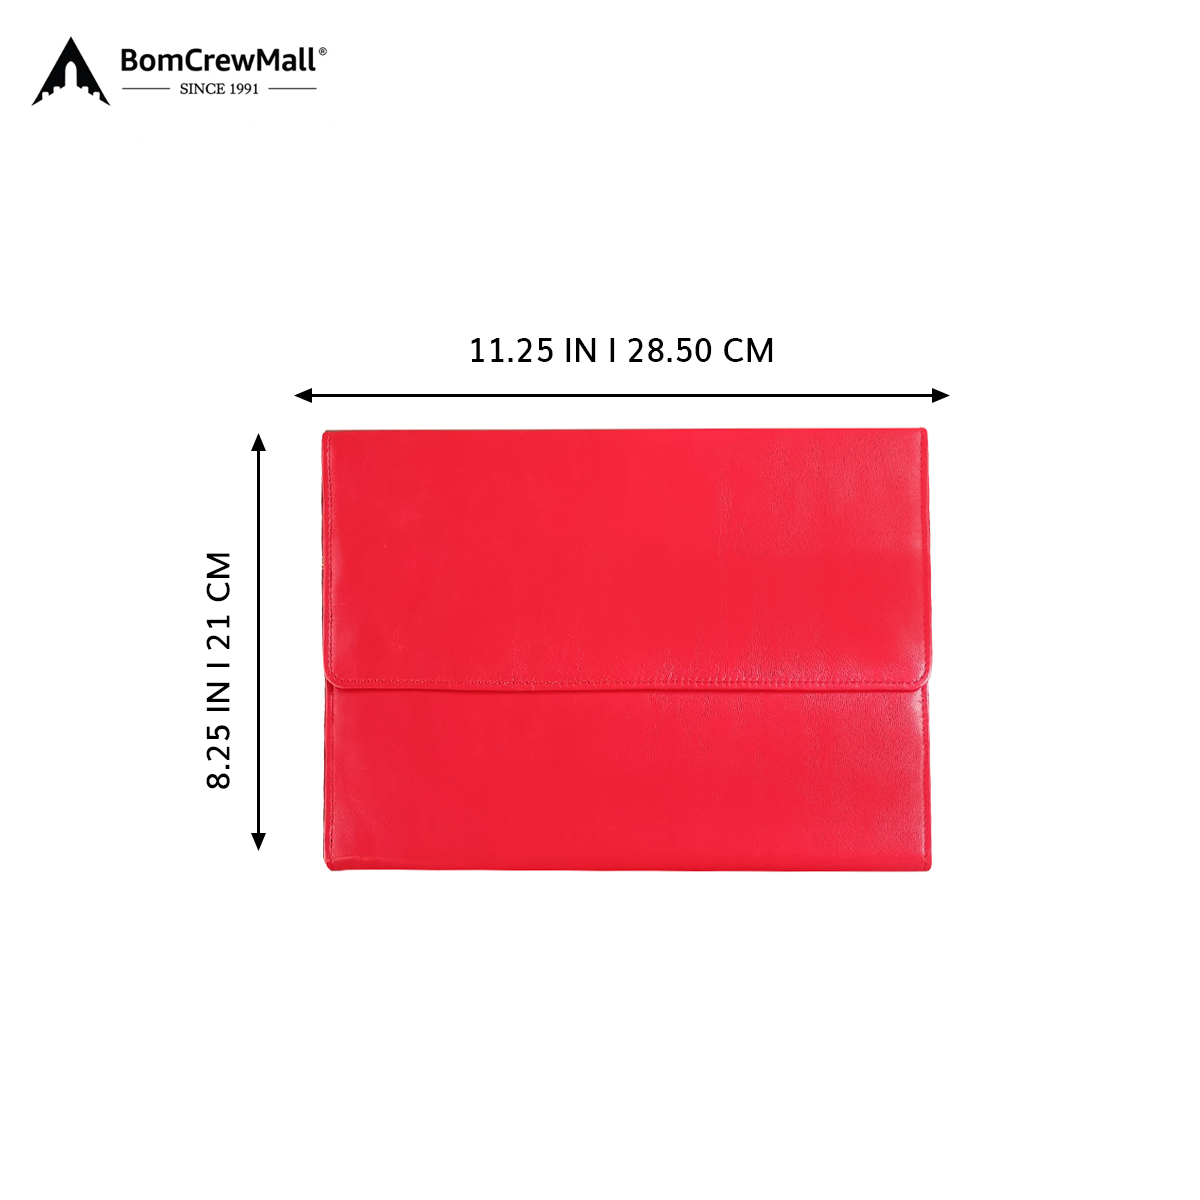 Image displays dimensions of red leather wallet